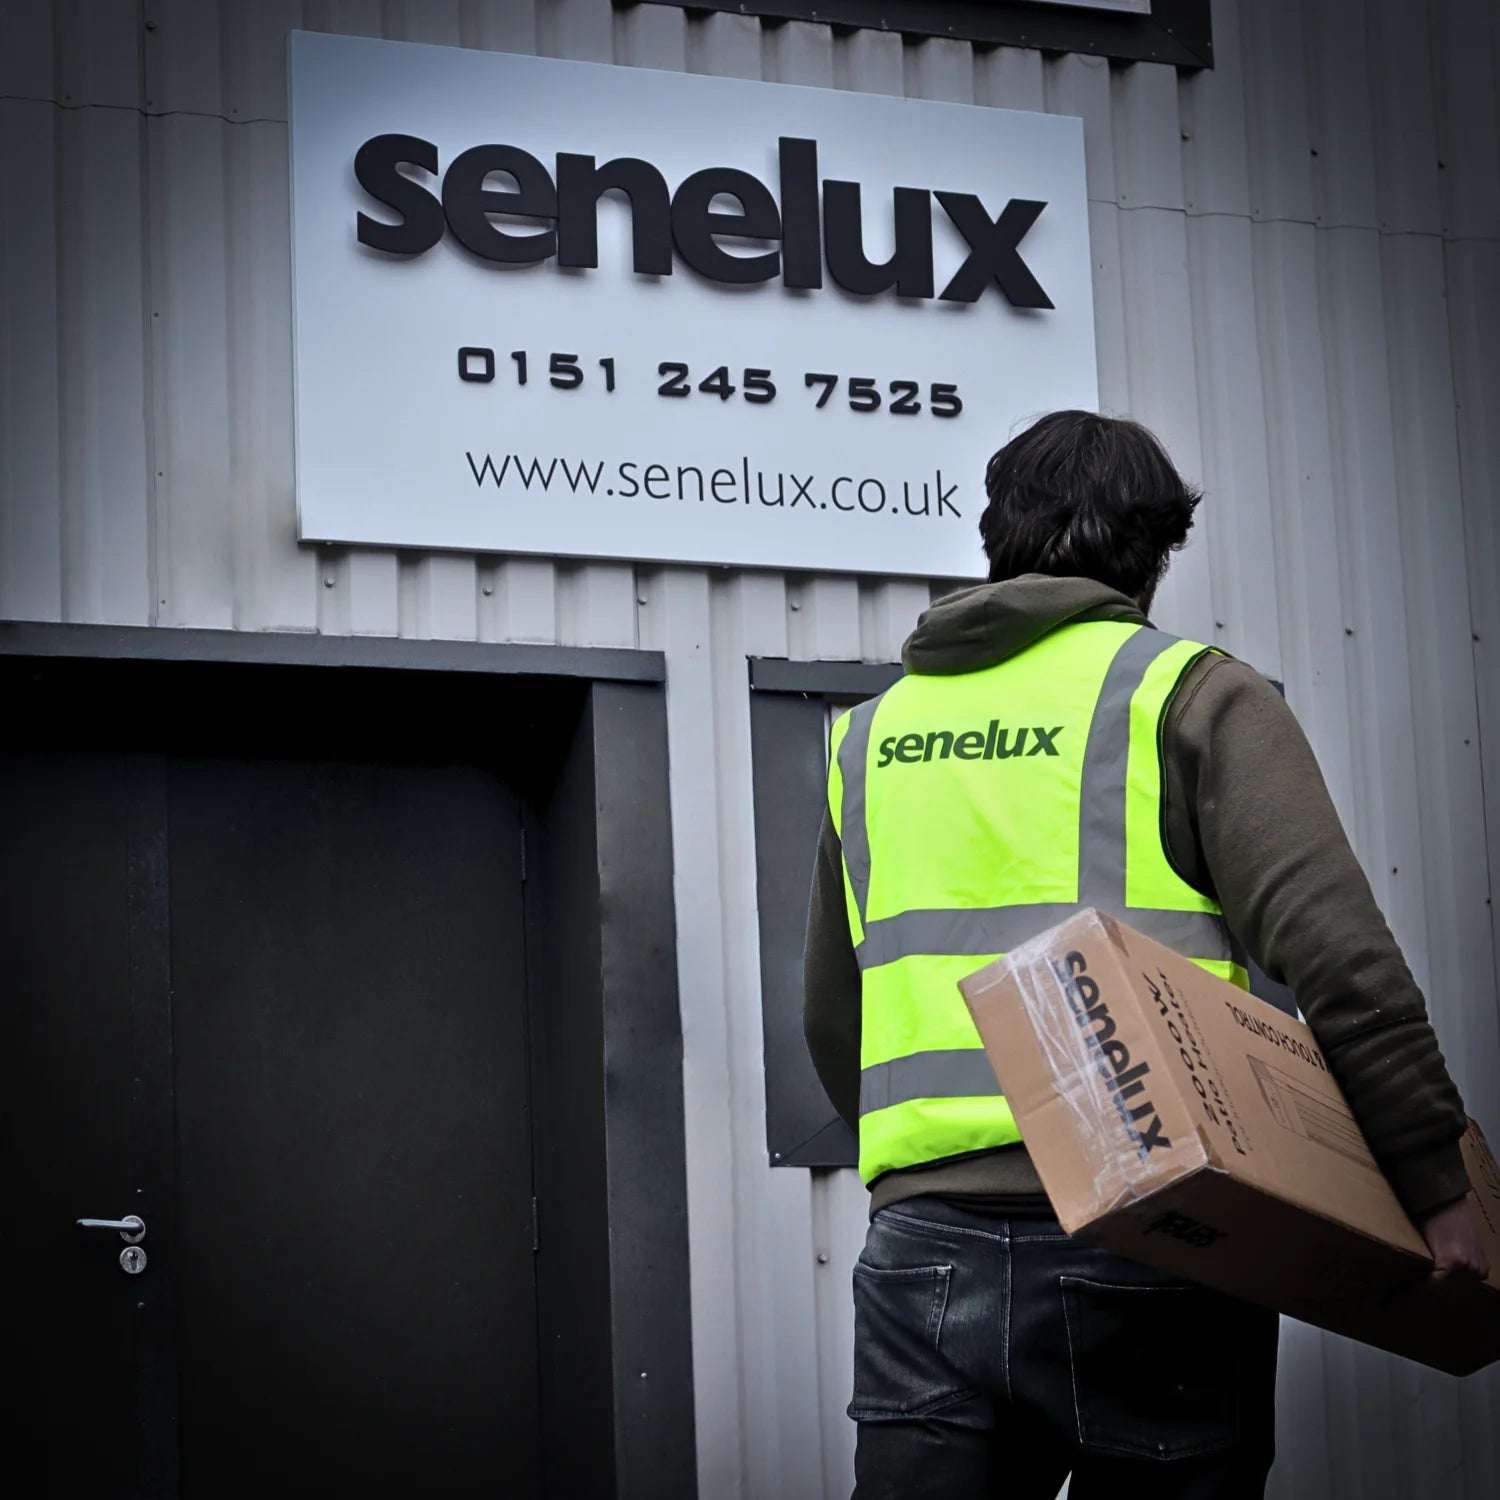 A Senelux warehouse specialist bringing in a new delivery of home appliances